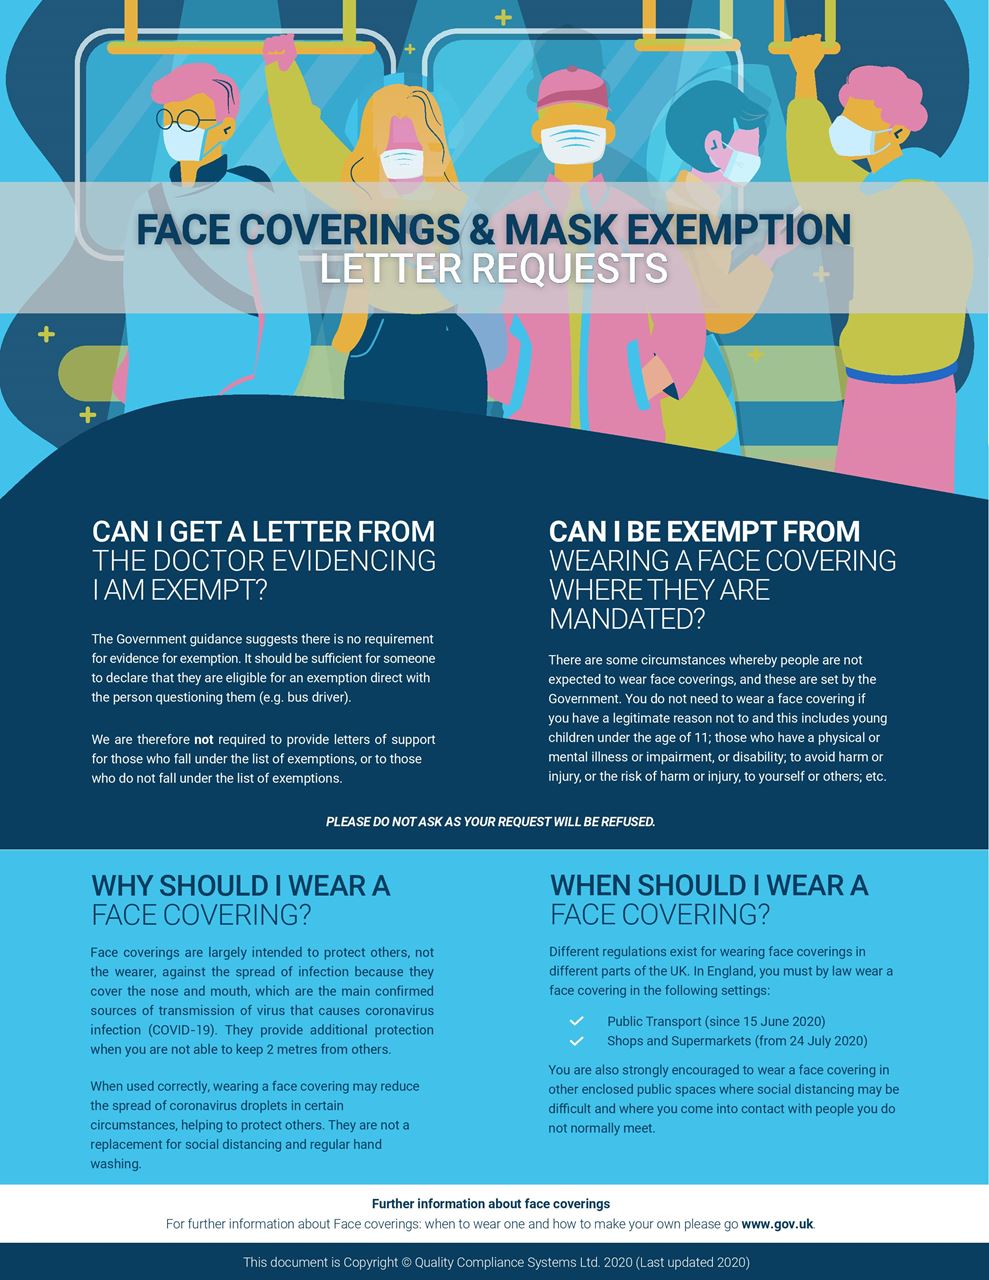 Face coverings and mask exemption requests